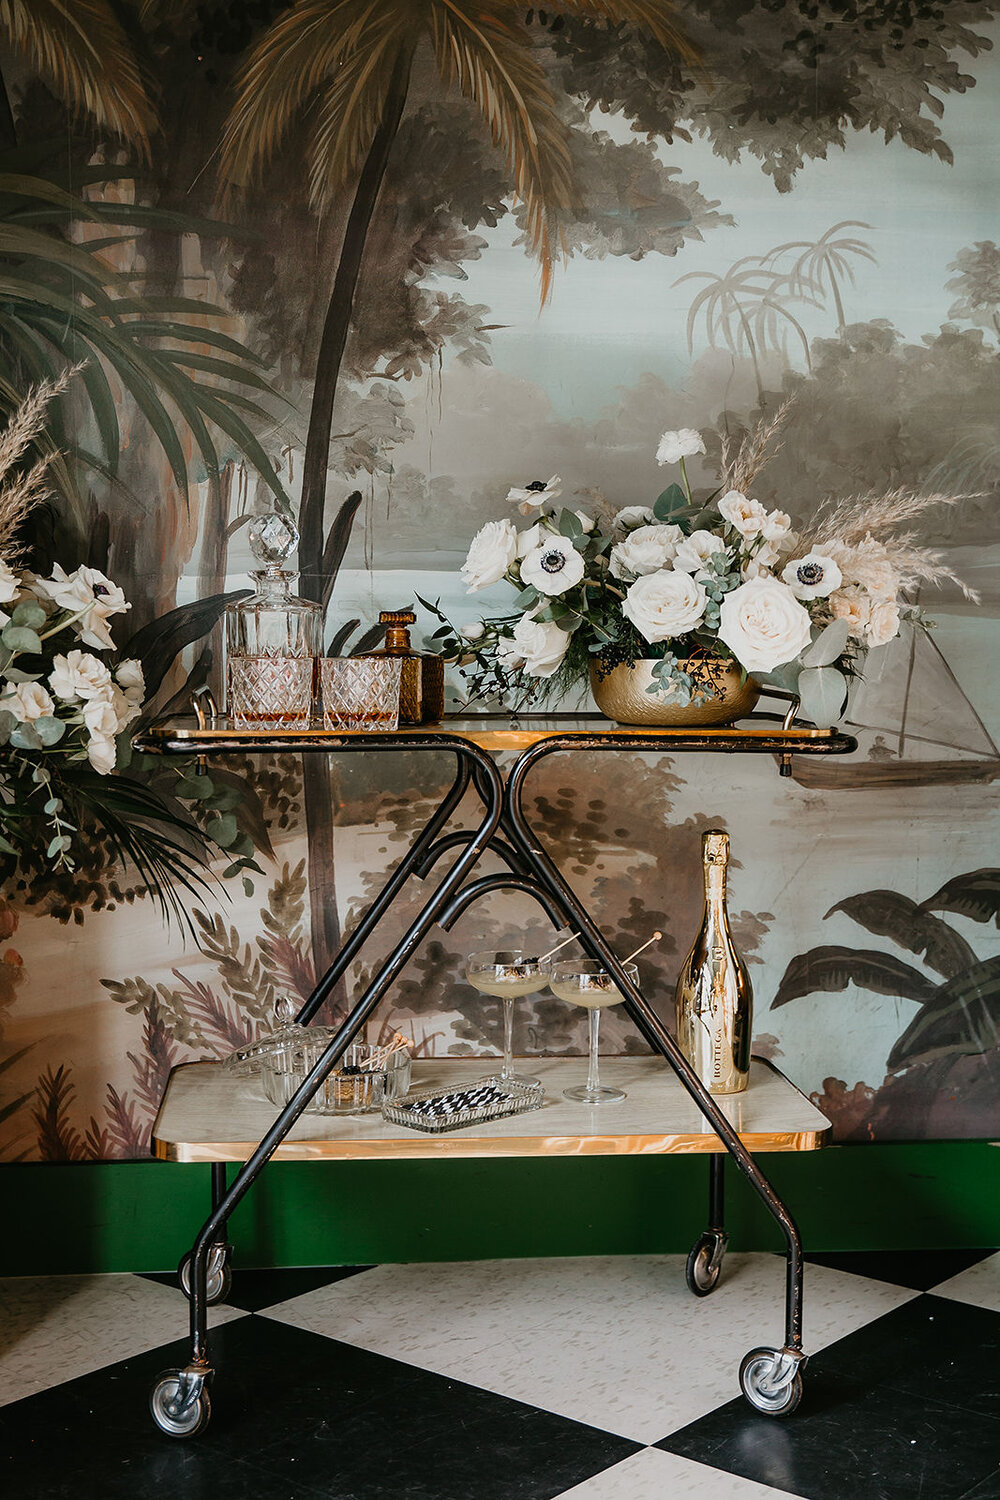 How to Plan a Themed Wedding Without Going Over the Top - luxury bar cart, tropical wedding inspiration, wedding lounge